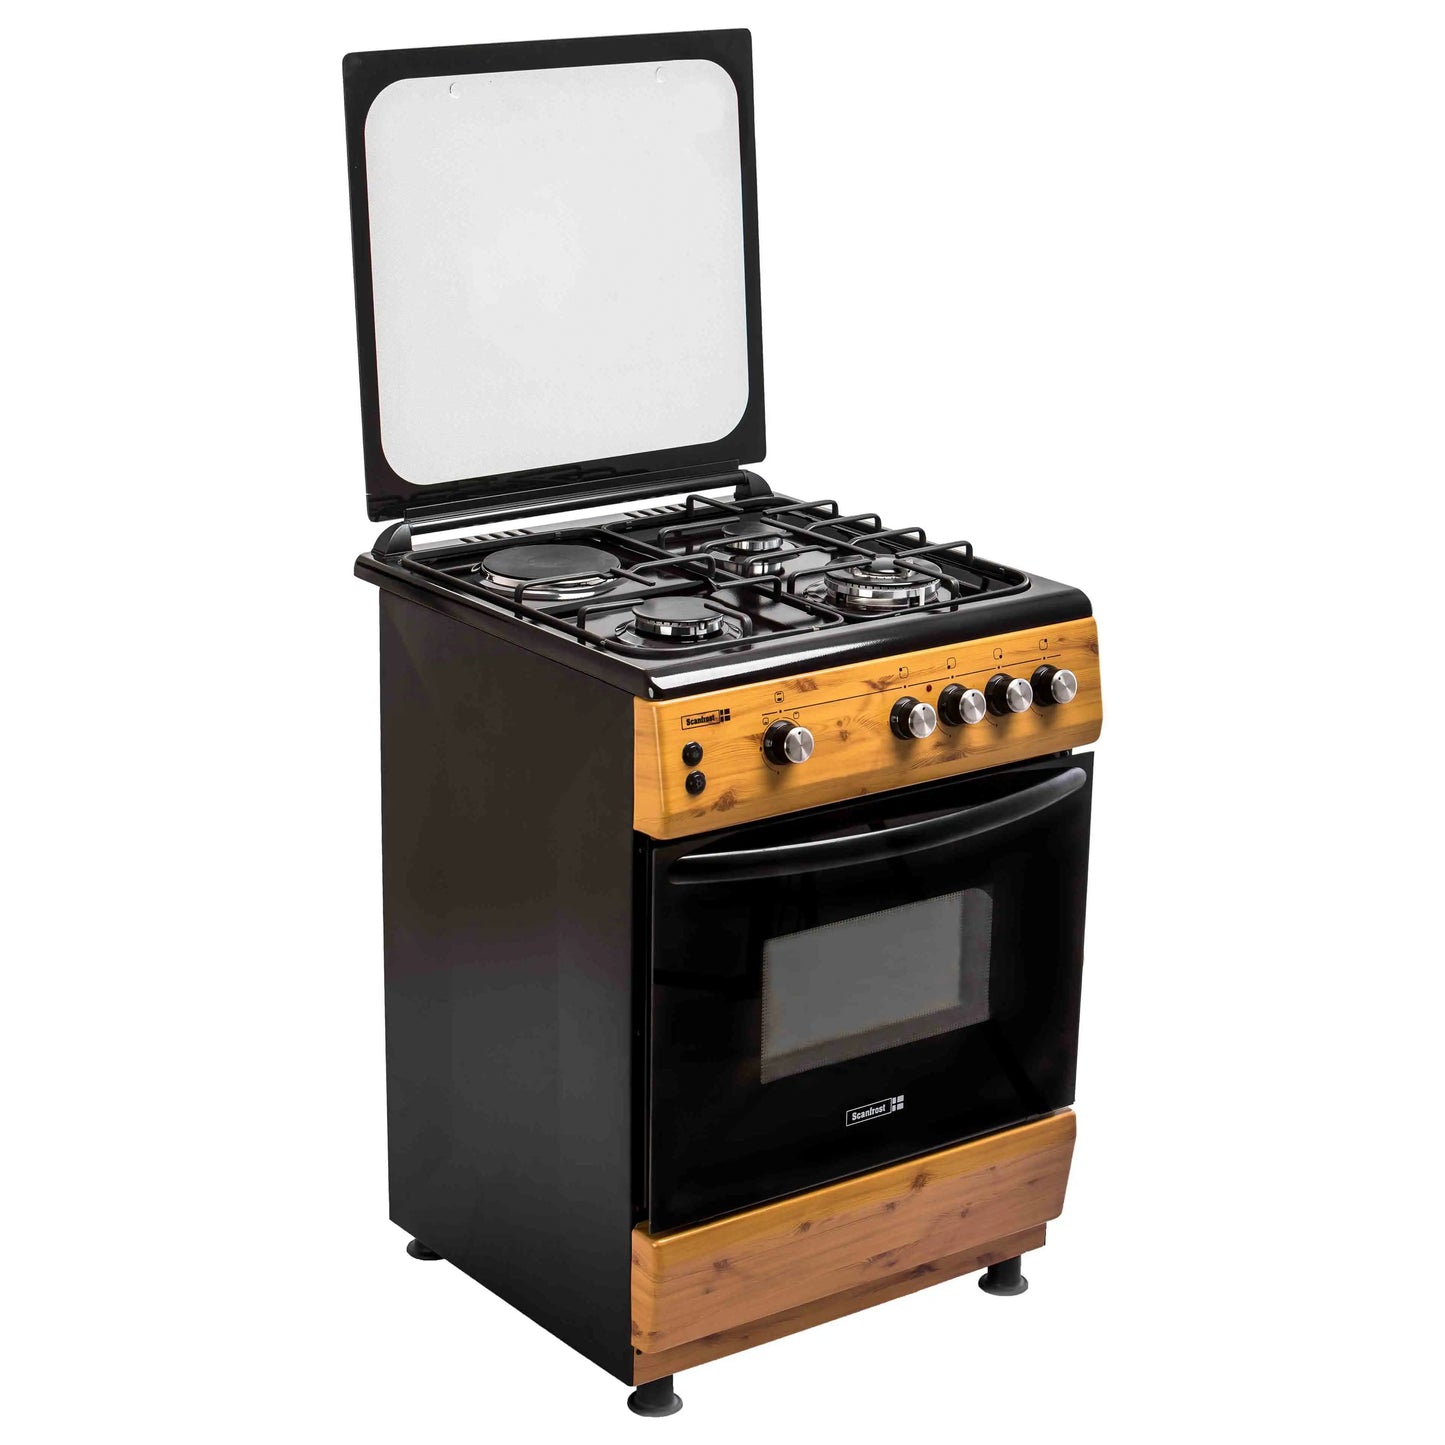 Scanfrost 60x60 3 Gas Burner + 1 Electric Hotplate Standing Cooker (wood finish)  CK6312NG